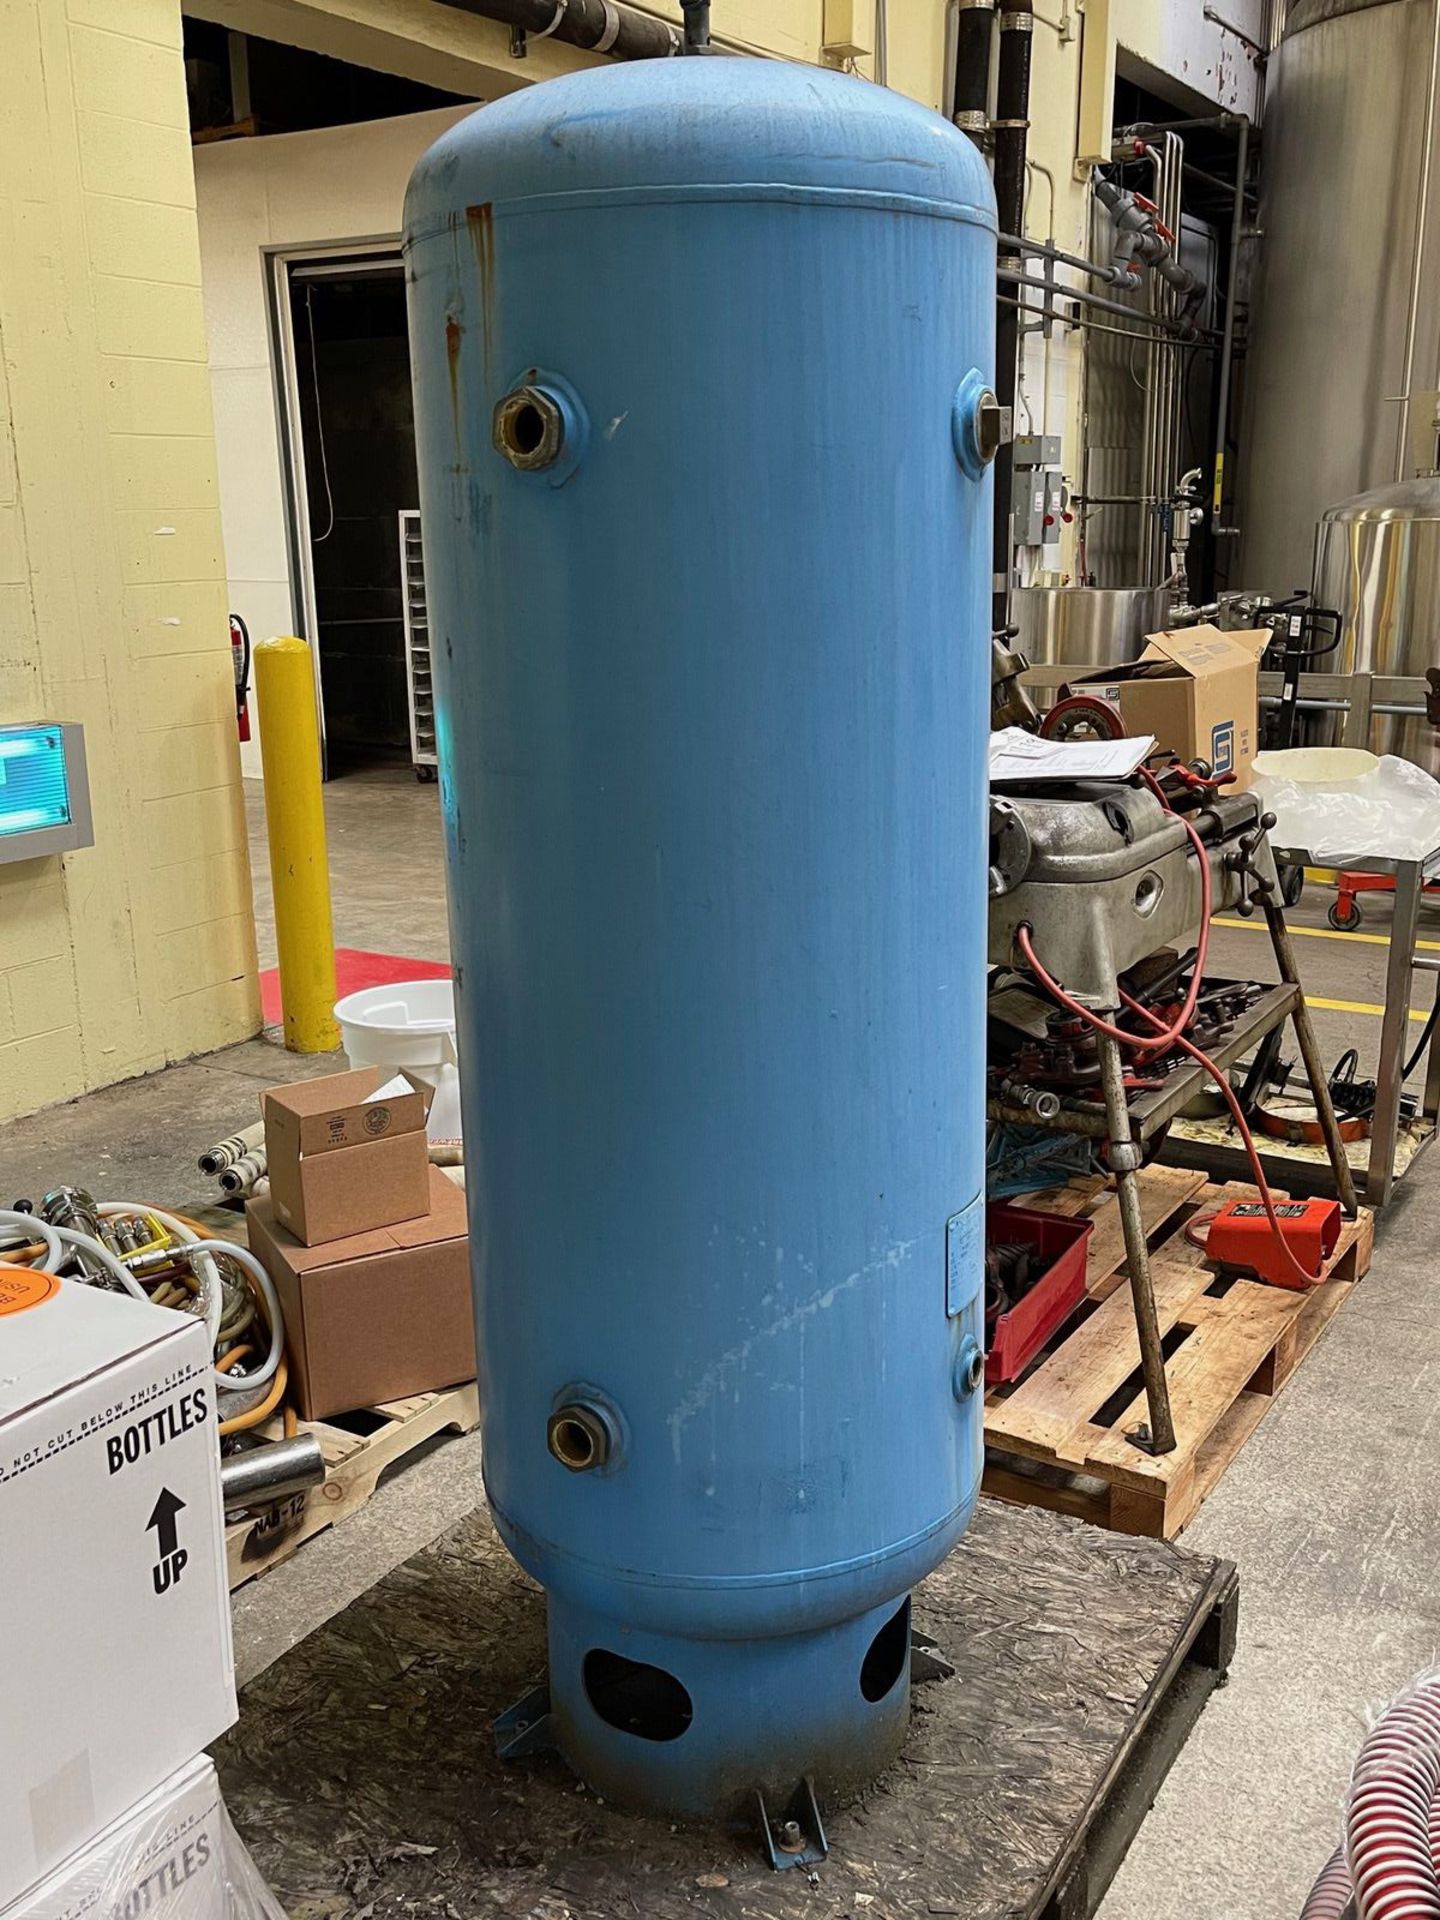 120 GALLON MANCHESTER COMPRESSED AIR TANK, 200 PSI, 2003, S/N 32580 | Rig Fee: 200 - Image 3 of 3